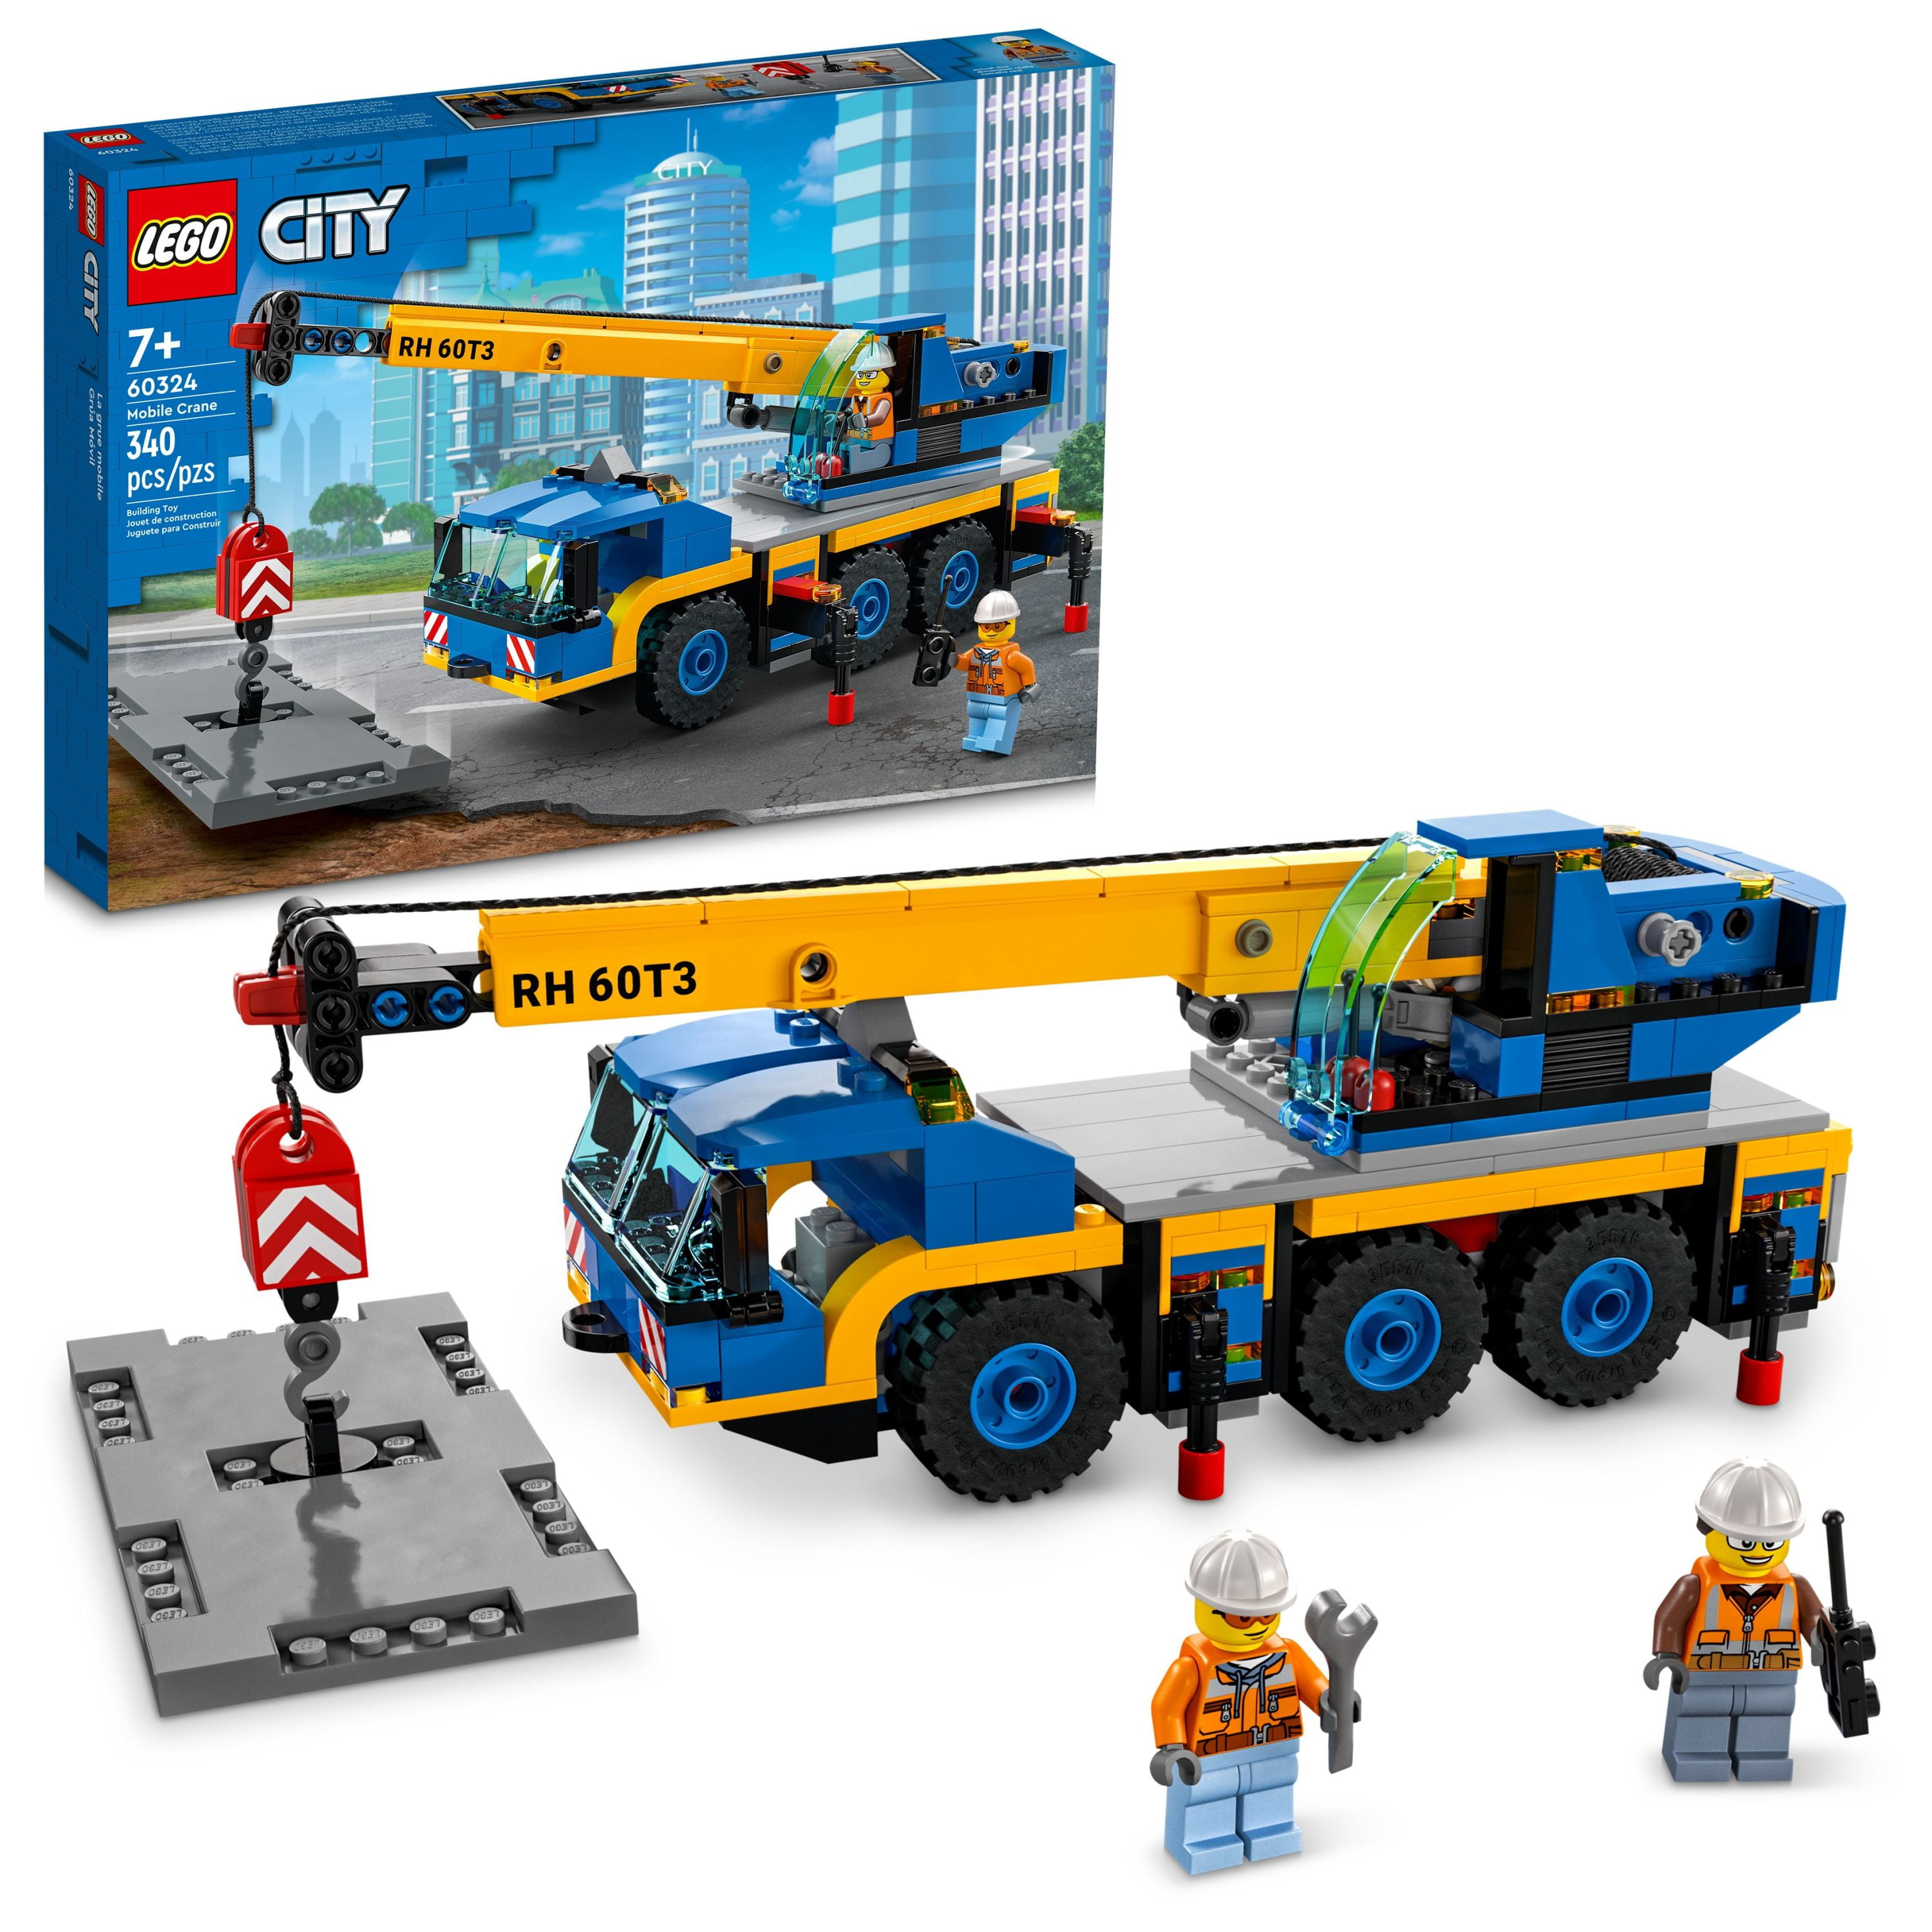 LEGO Great Vehicles Crane Truck Toy Building Set 60324 - Vehicle Model, Featuring 2 Minifigures with Tool Toys Kit and Road Plate, Playset for Boys and Girls Ages 7+ - Walmart.com